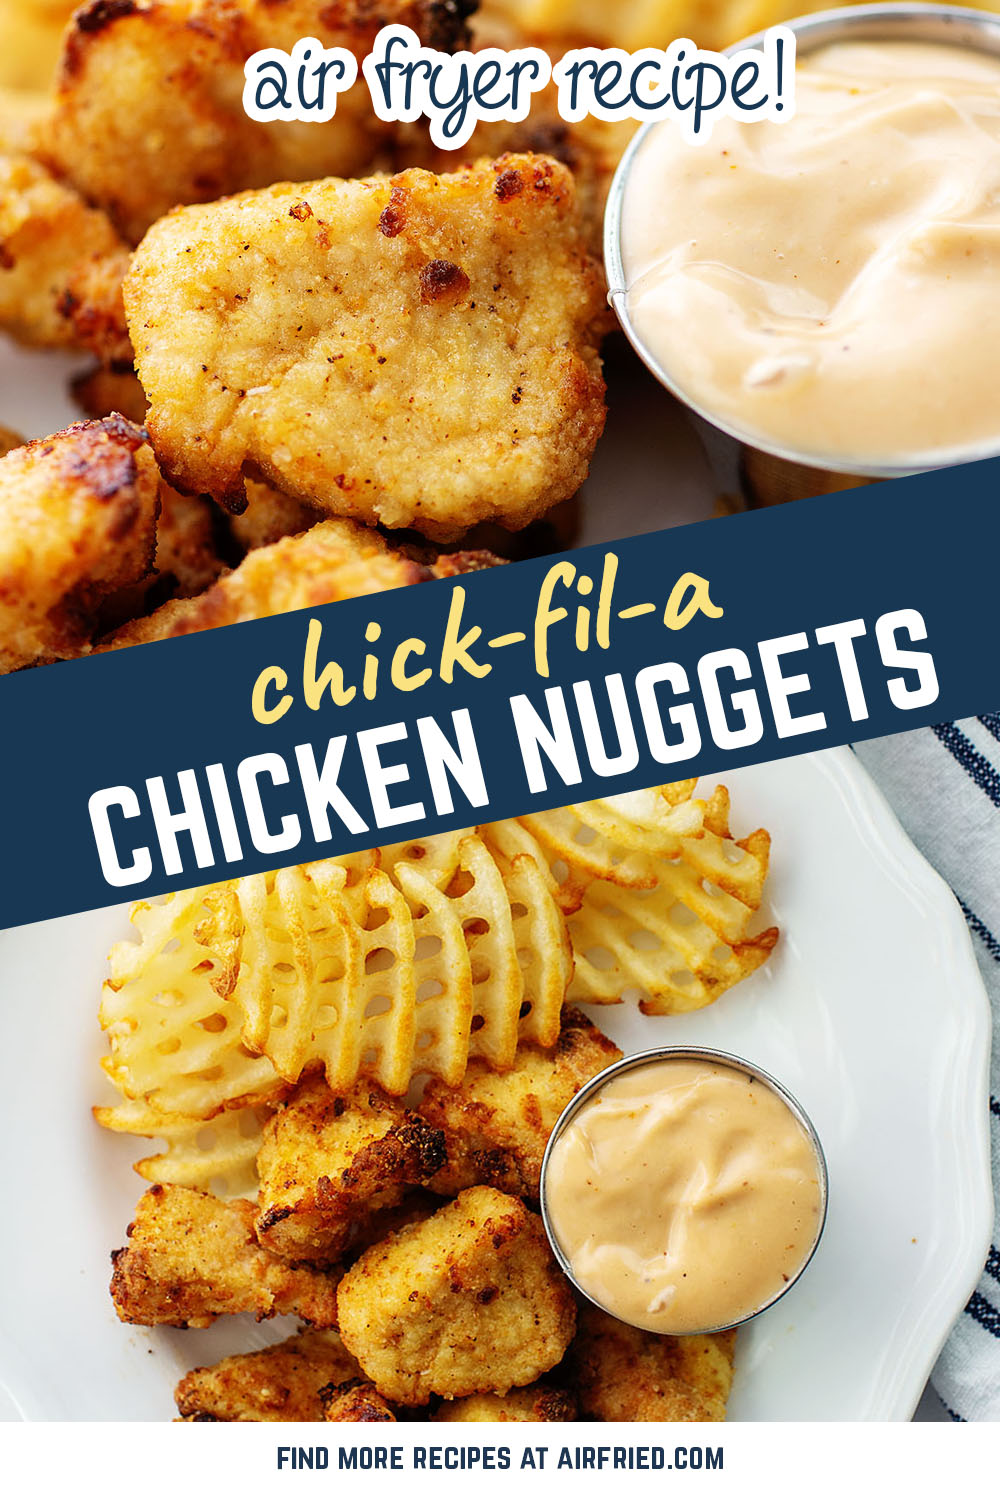 Try making these copy cat chick fil a nuggets in your air fryer!